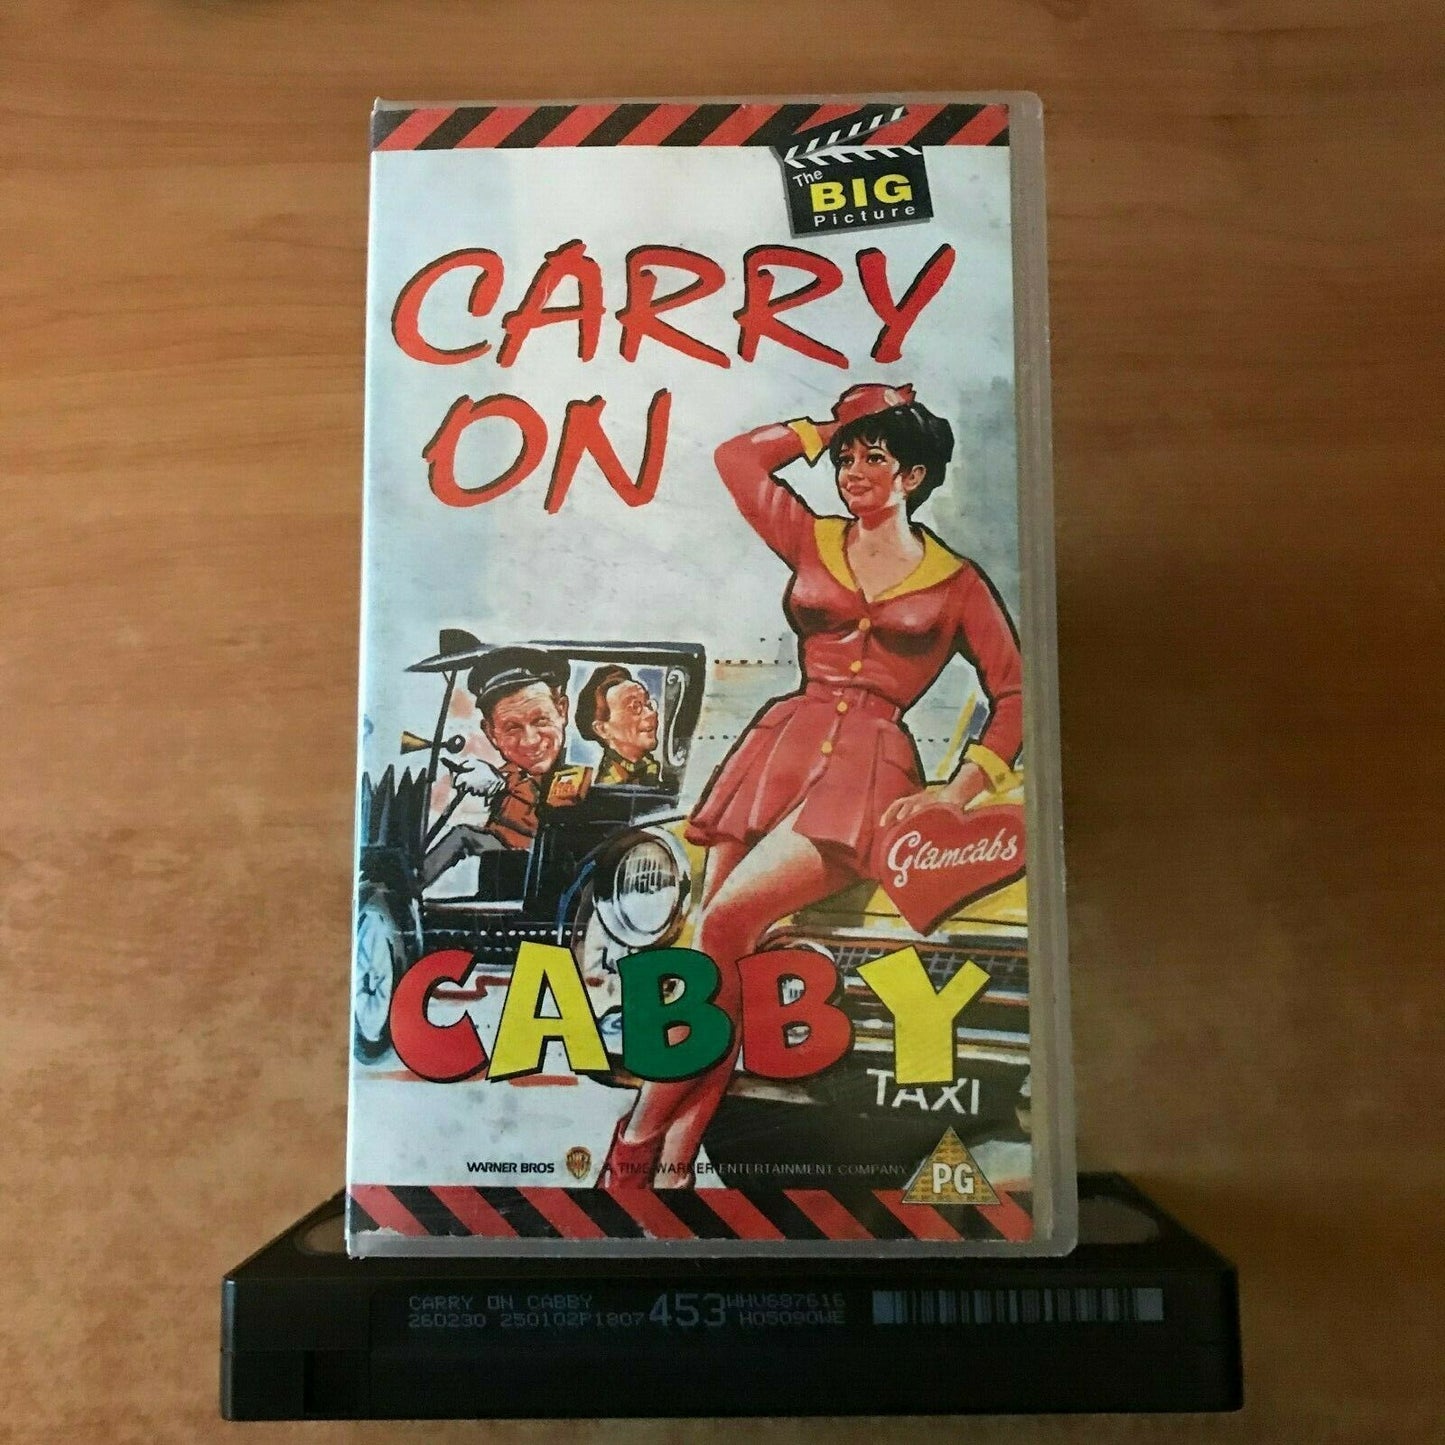 Carry On Cabby (1963): 7th "Carry On" Film Series - Comedy - Sidney James - VHS-